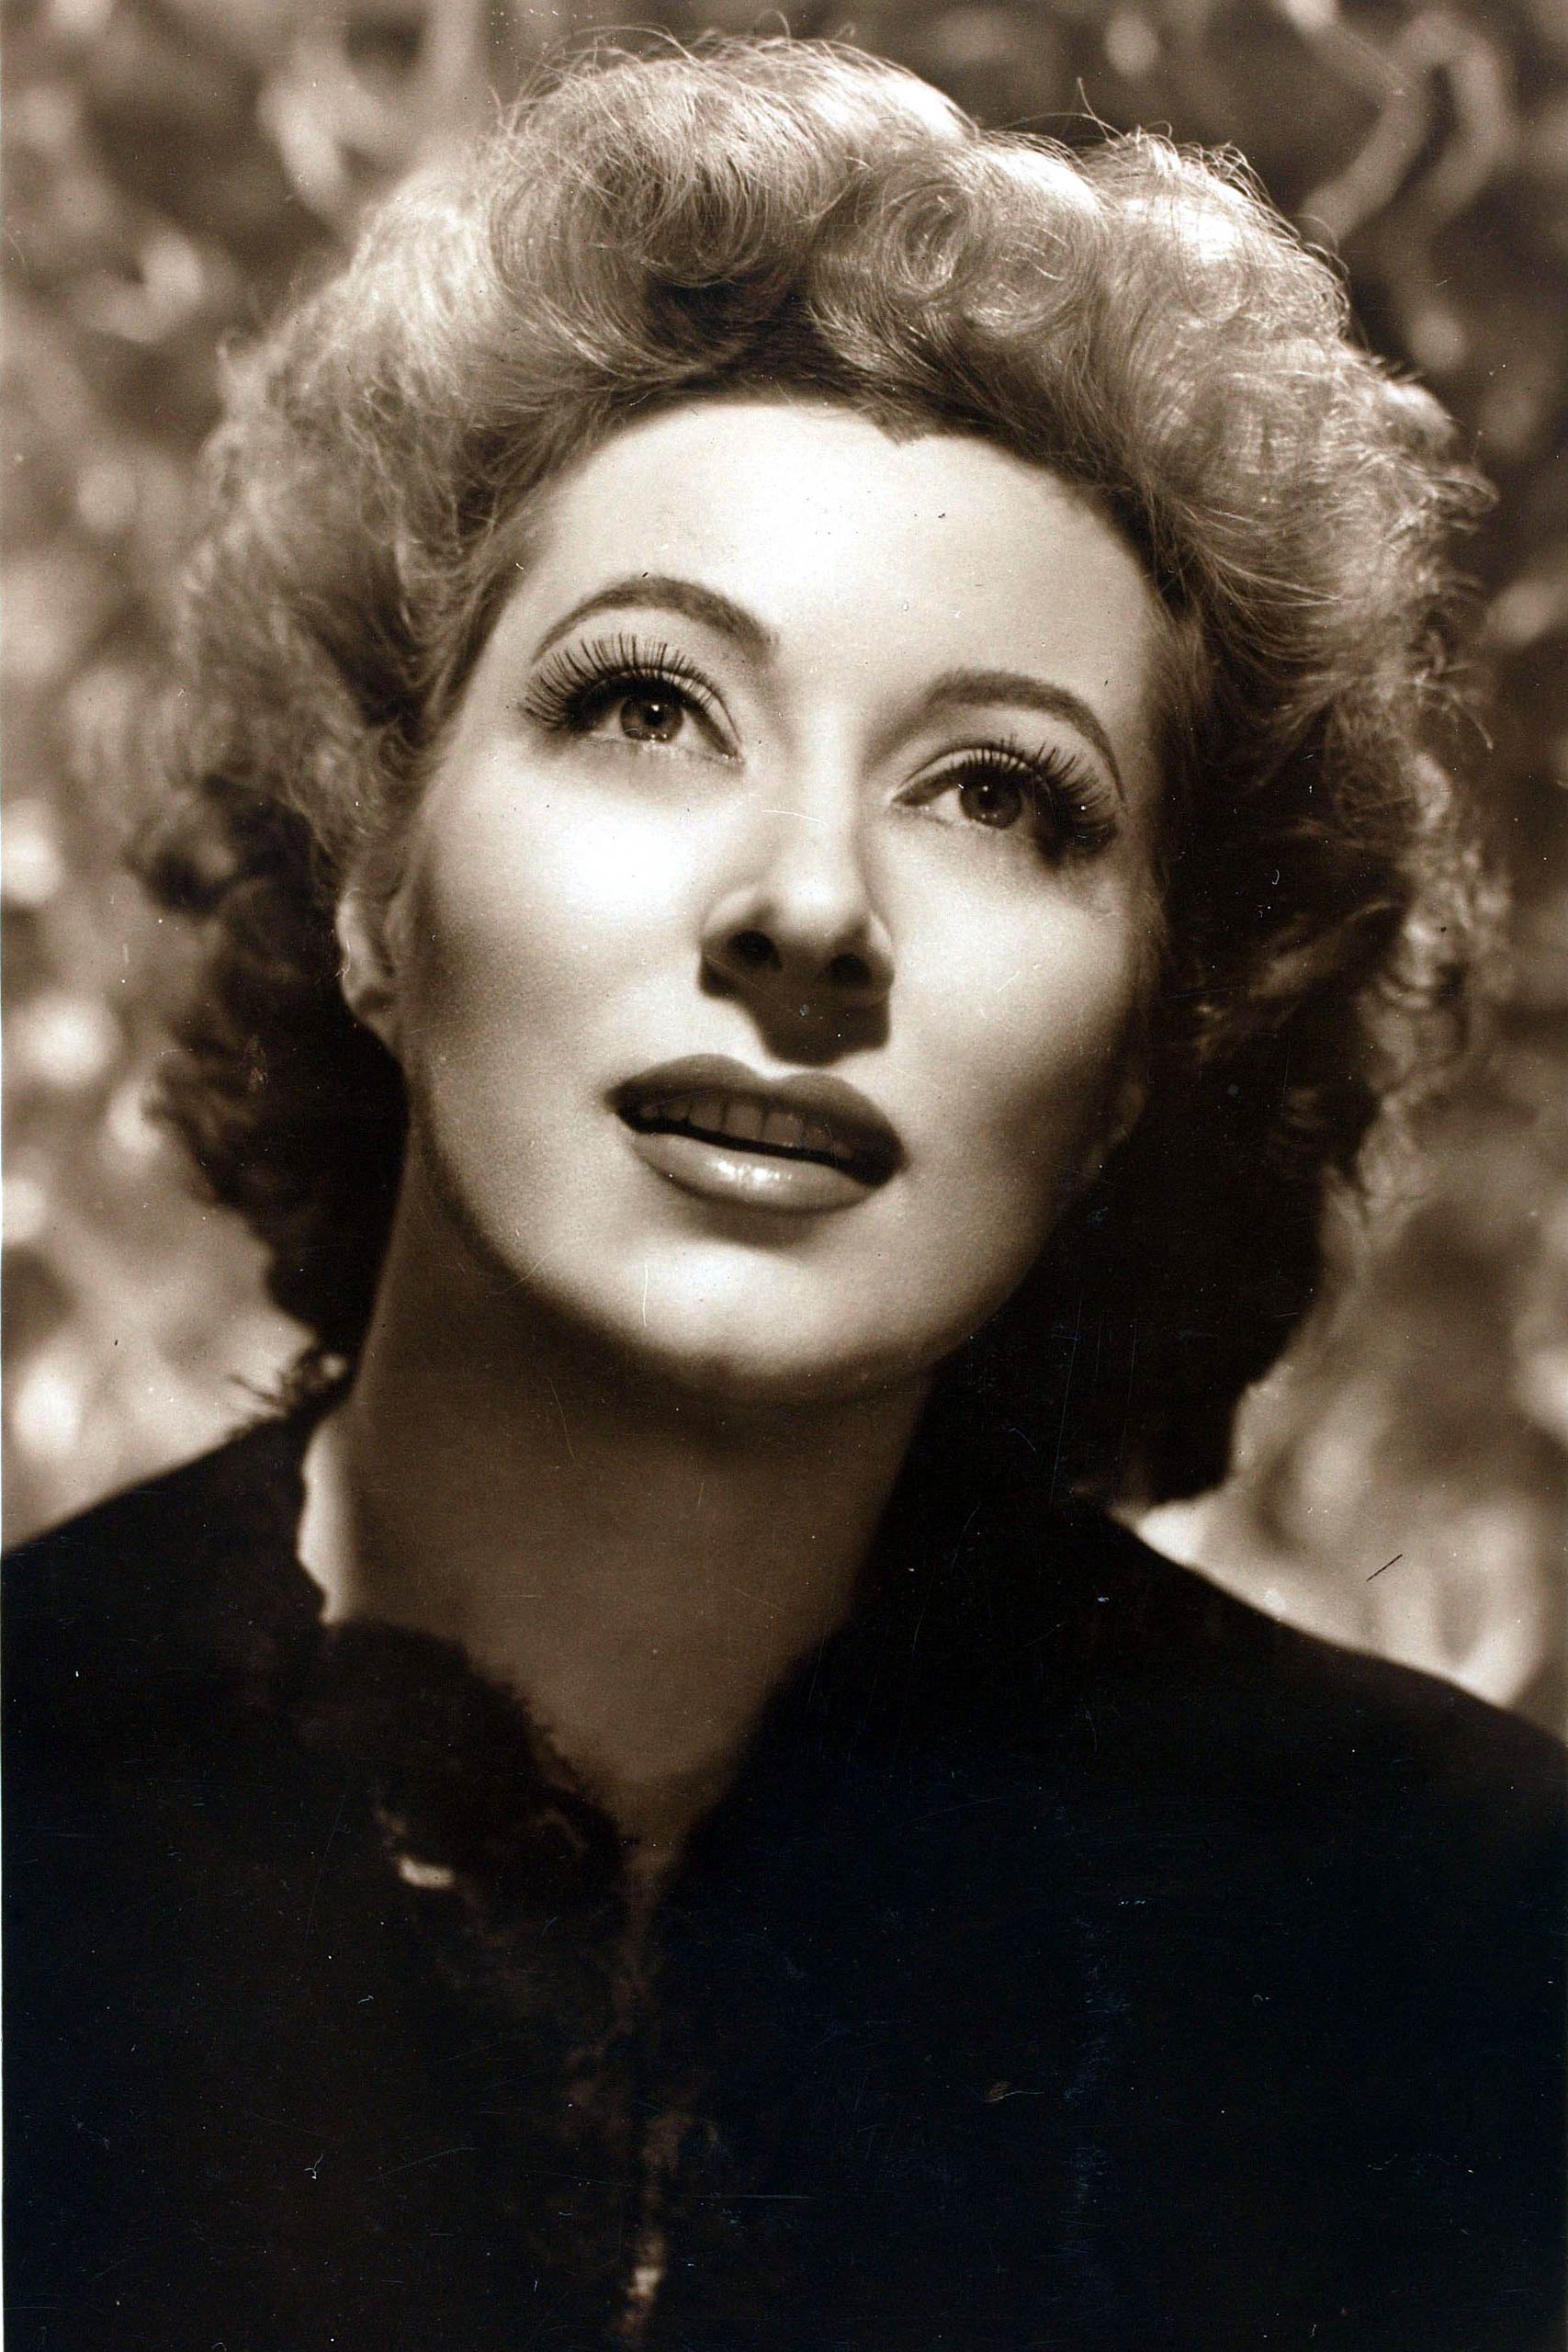 Cinema. Personalities. circa 1940's. British actress Greer Garson, portrait, among her many films "Goodbye Mr. Chips" 1939 and her 1st Academy Award film "Mrs. Miniver" 1942.